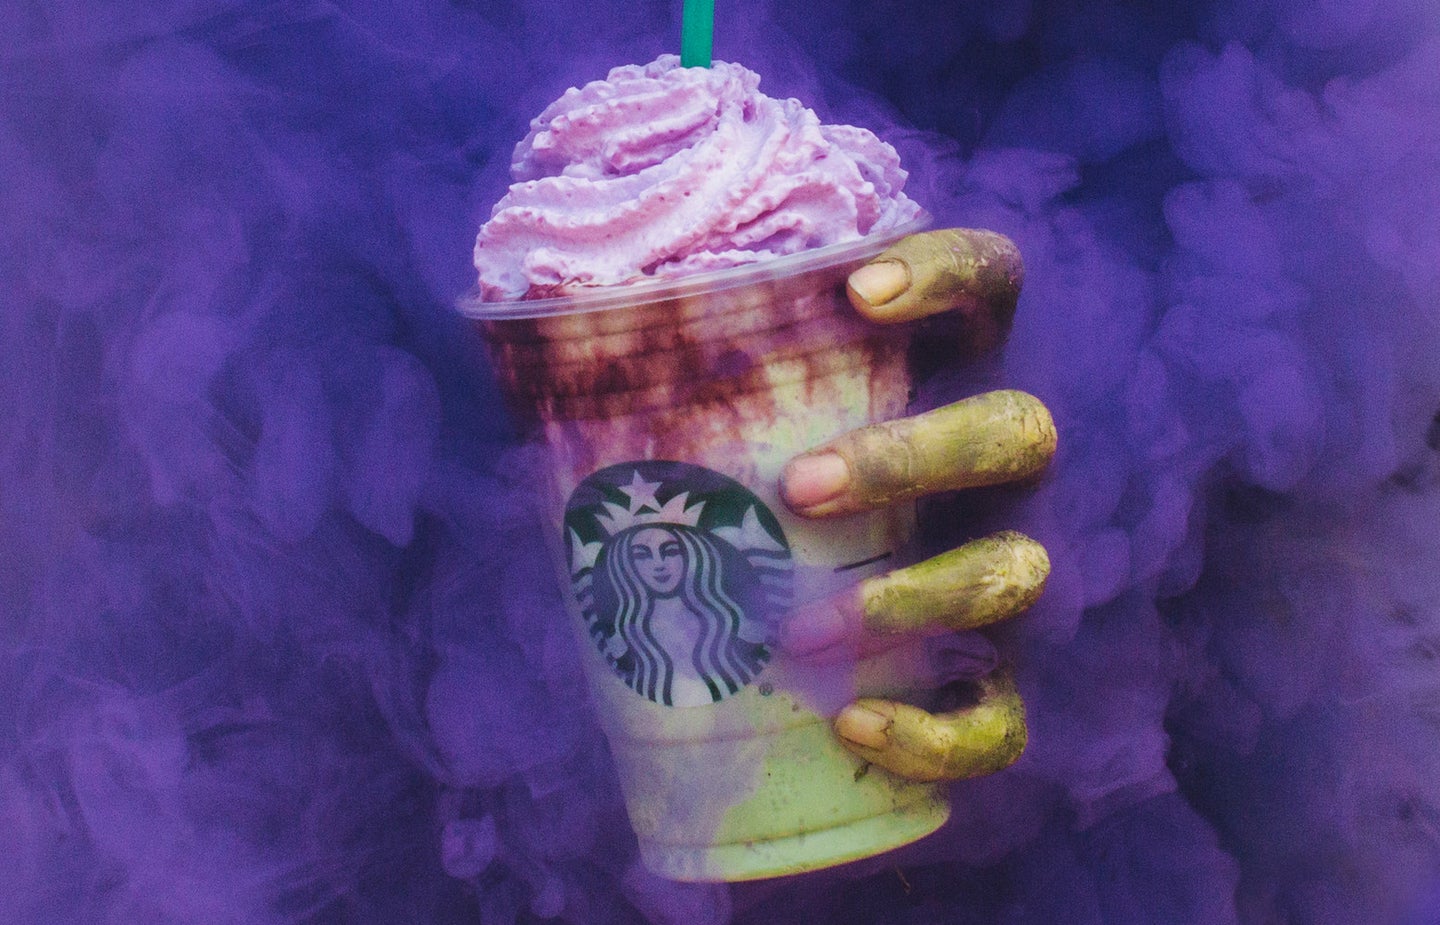 Starbucks Just Released a Zombie Frappuccino (Seriously)